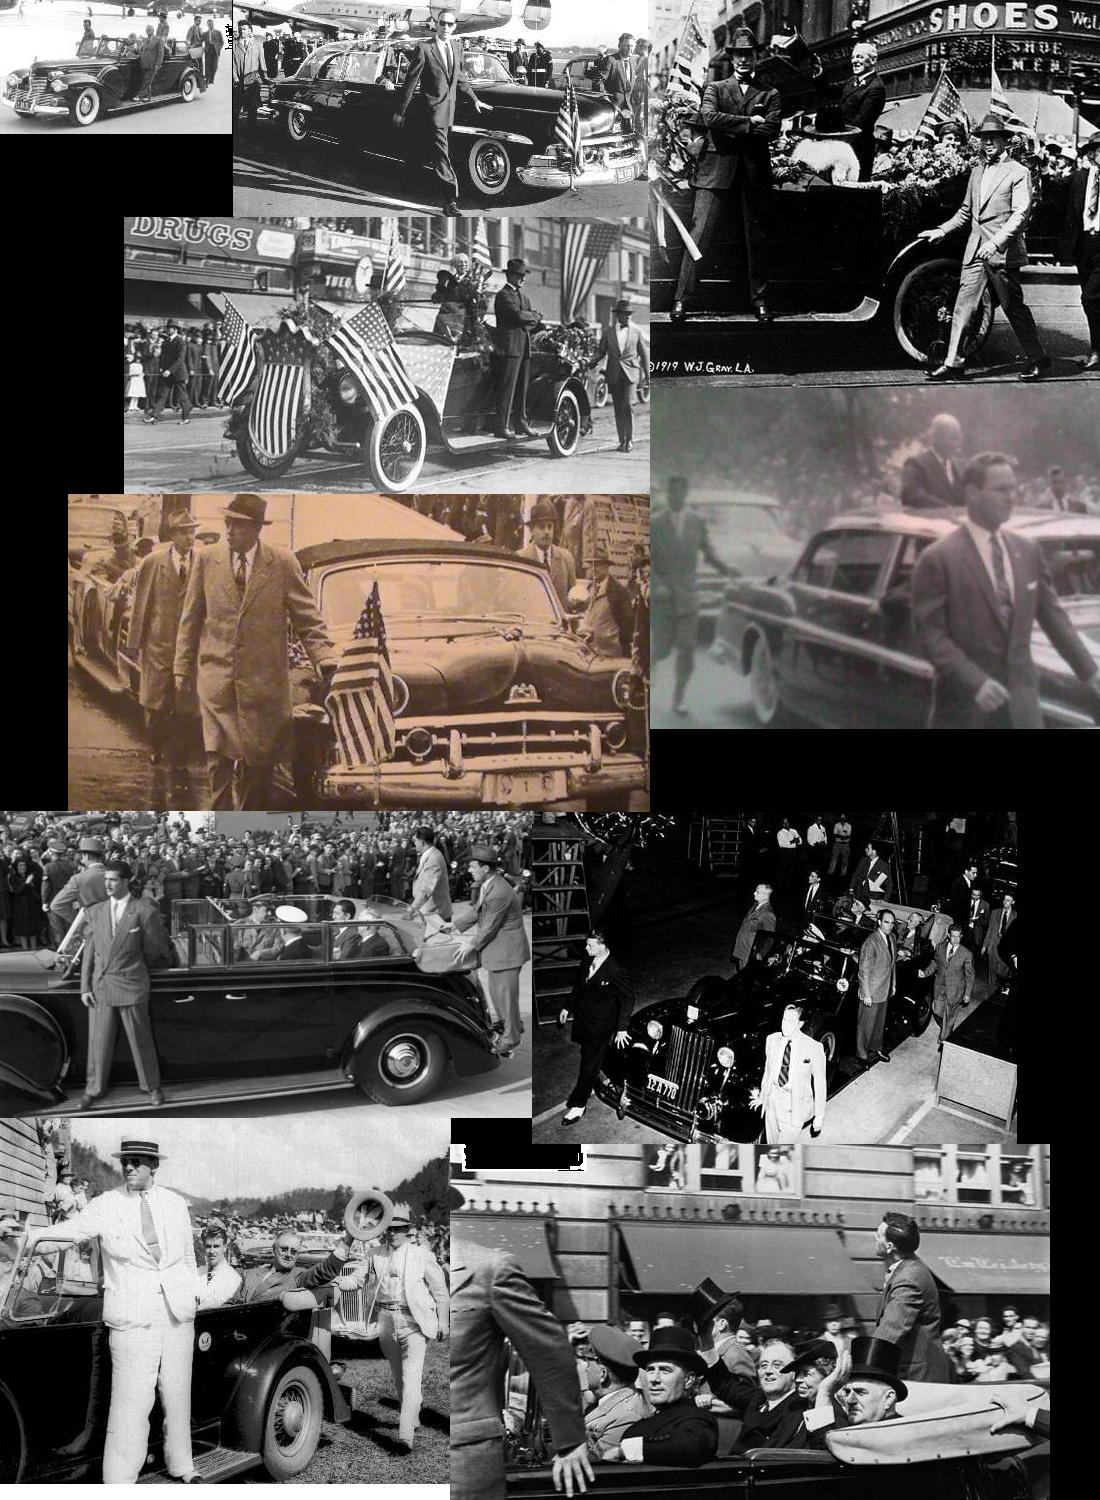 Agents on/ near limo, Wilson-Ike era: even MORE obtrusive than during JFK era! They didn't mind